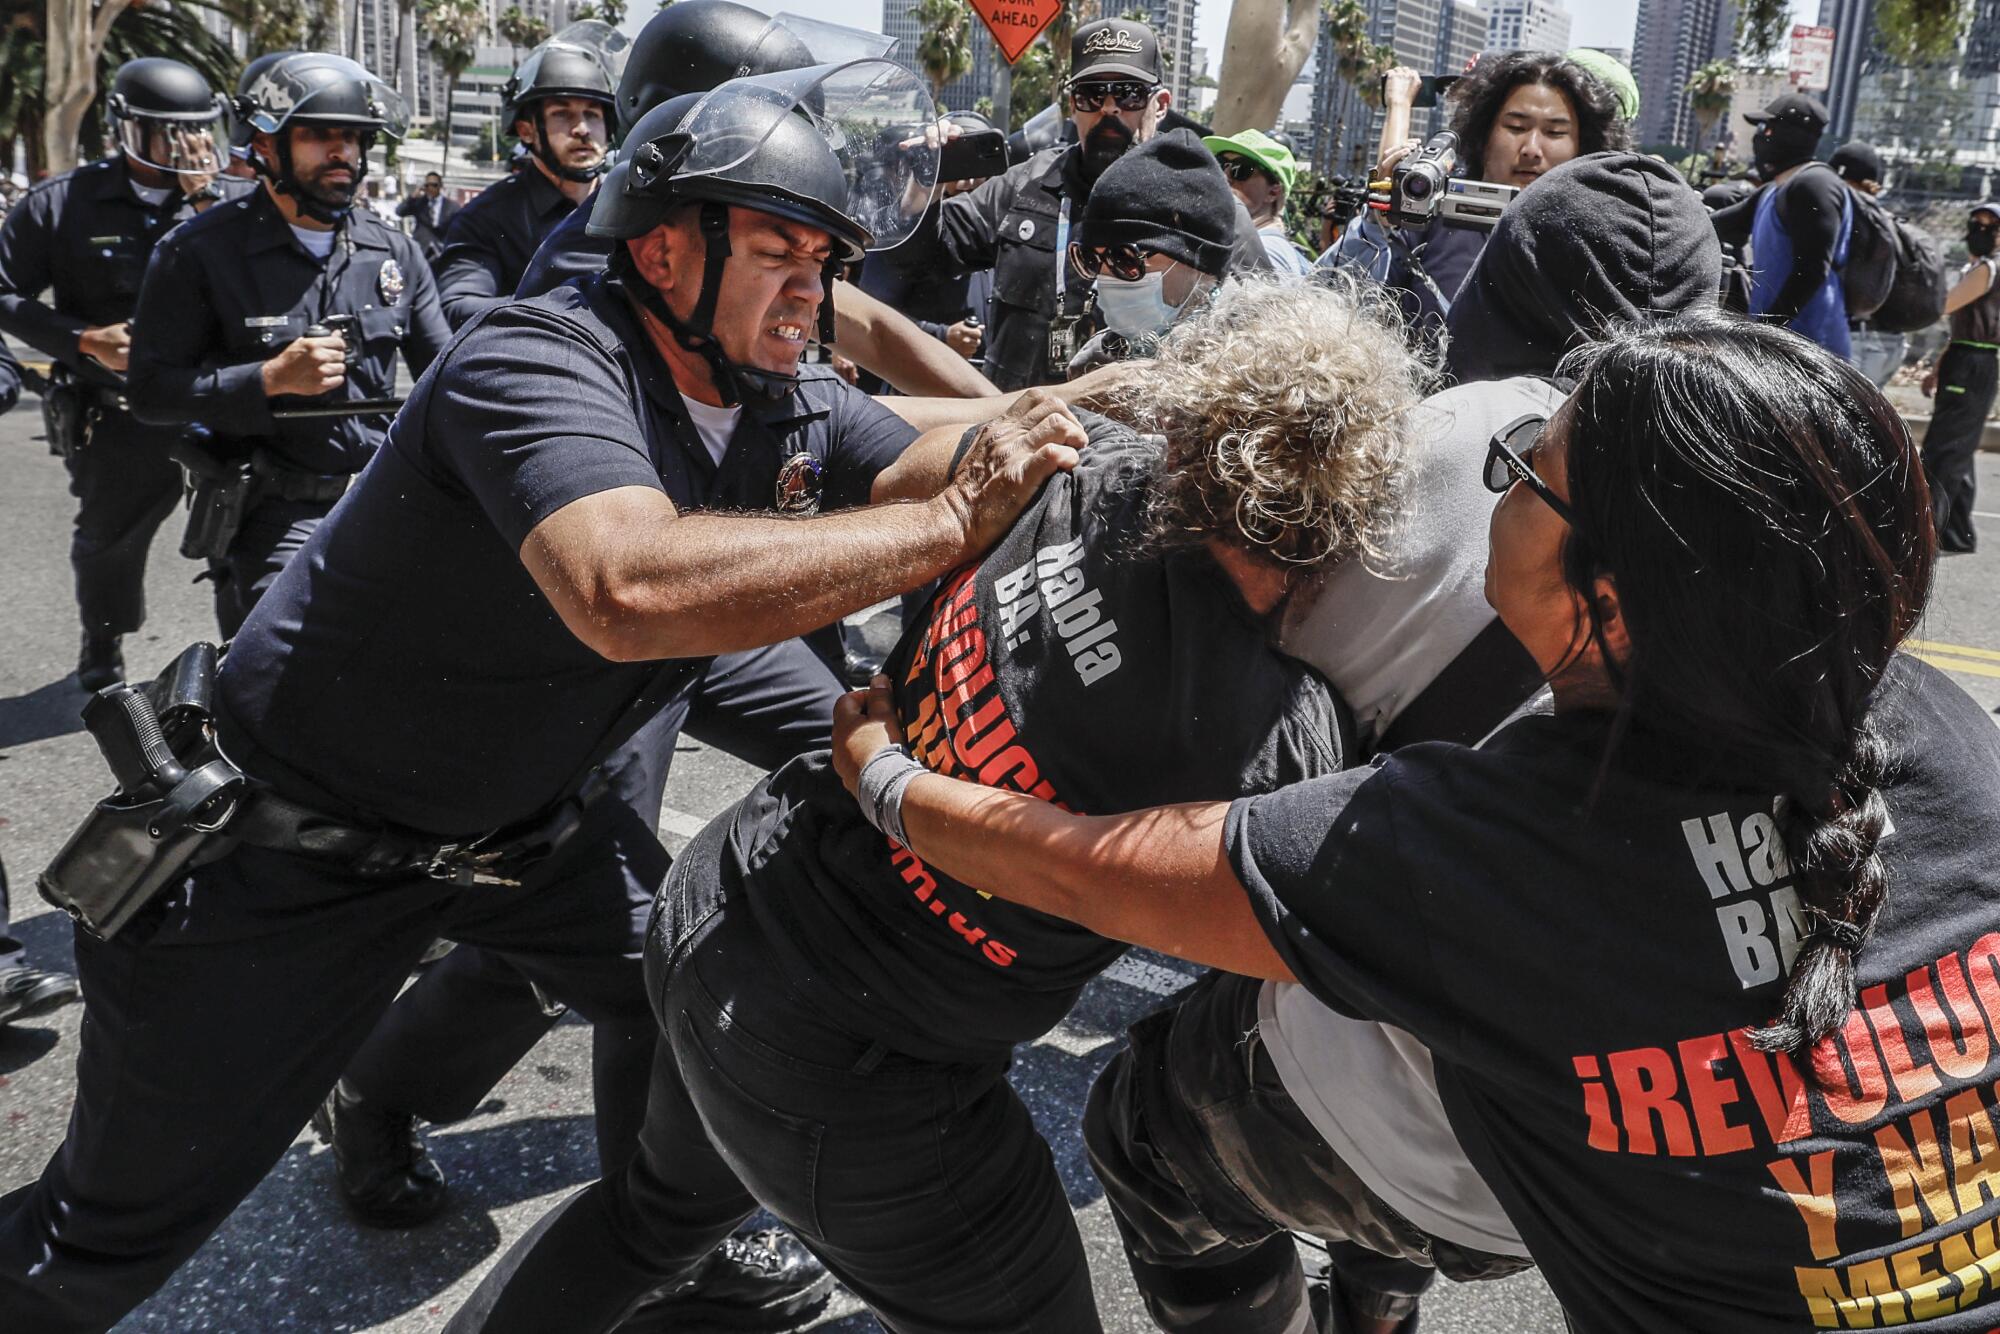 LAPD officers grapple with protesters.